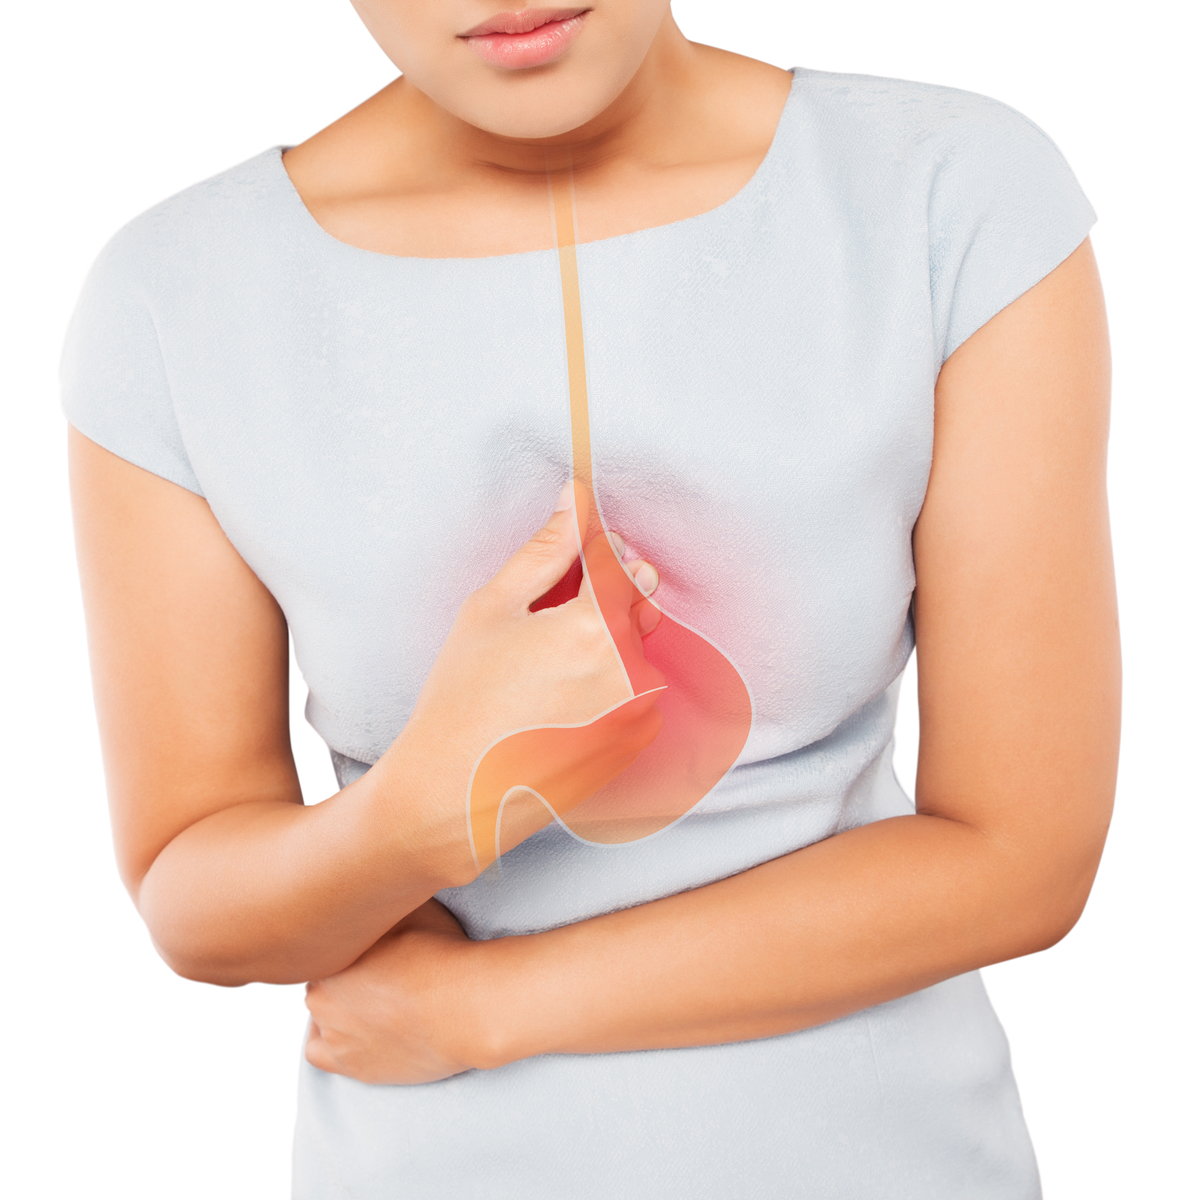 Acid Reflux (GER & GERD) Symptoms, Causes, And Treatments